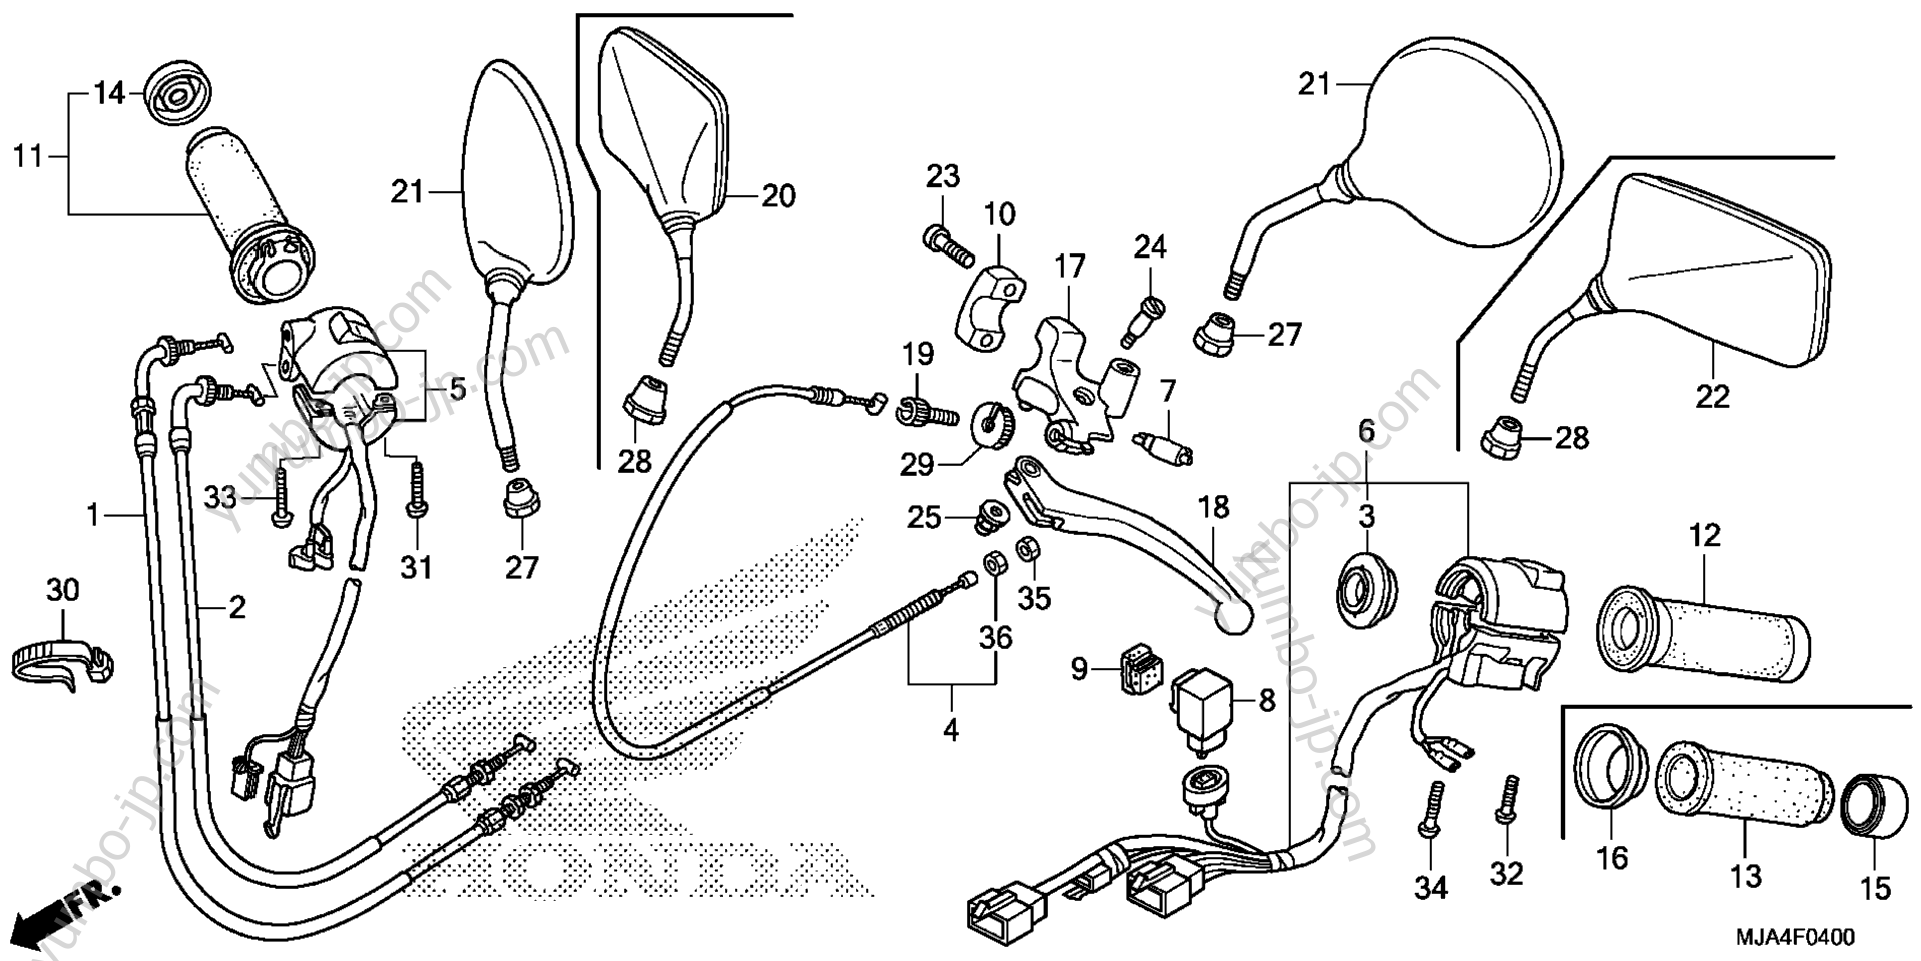 HANDLE LEVER / SWITCH / CABLE for motorcycles HONDA VT750C2 AC 2012 year